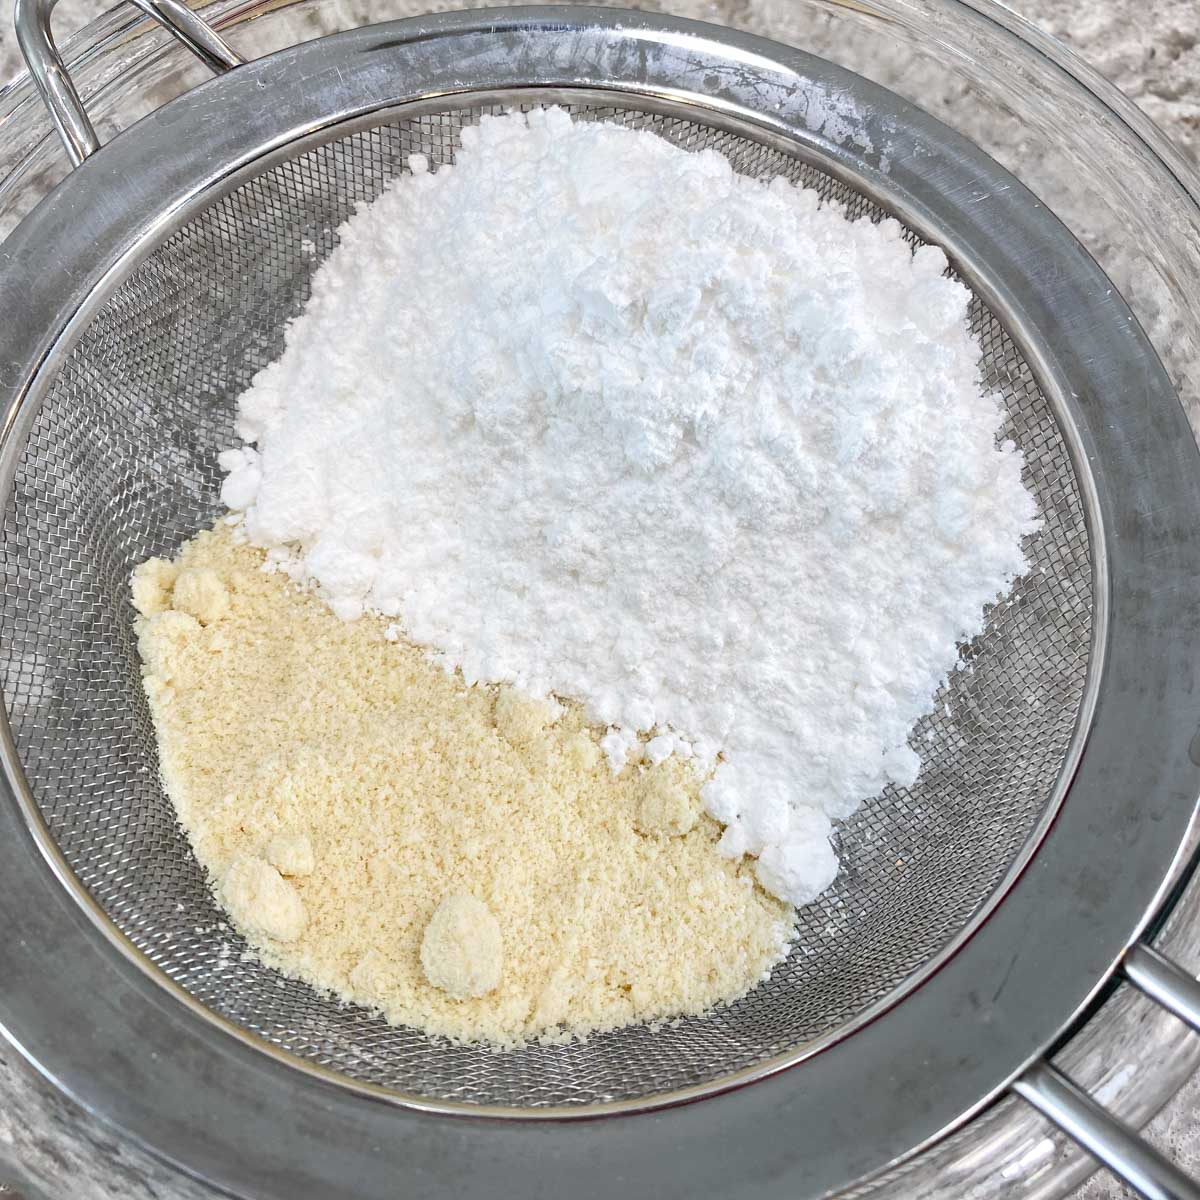 Confectioners' sugar and almond meal in a stainless steel sifter.